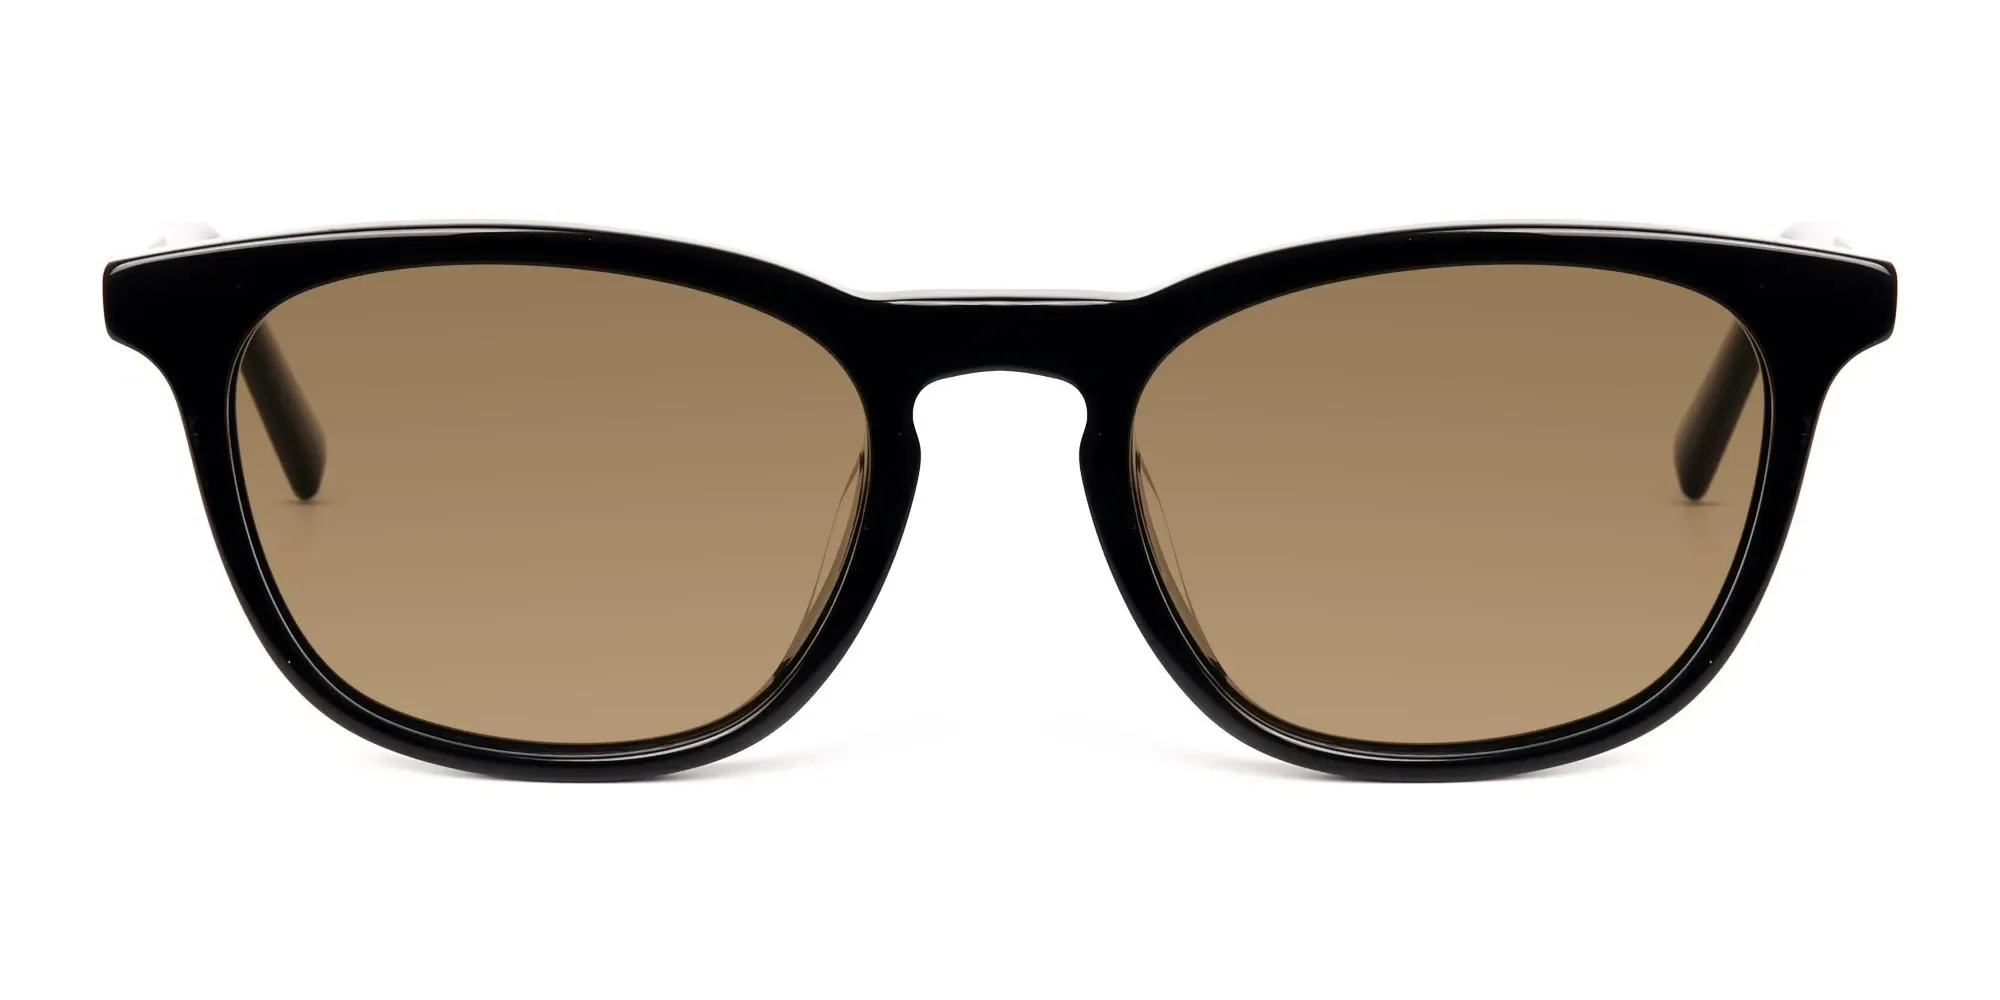 black-thick-square-dark-brown-tinted-sunglasses-frames-2